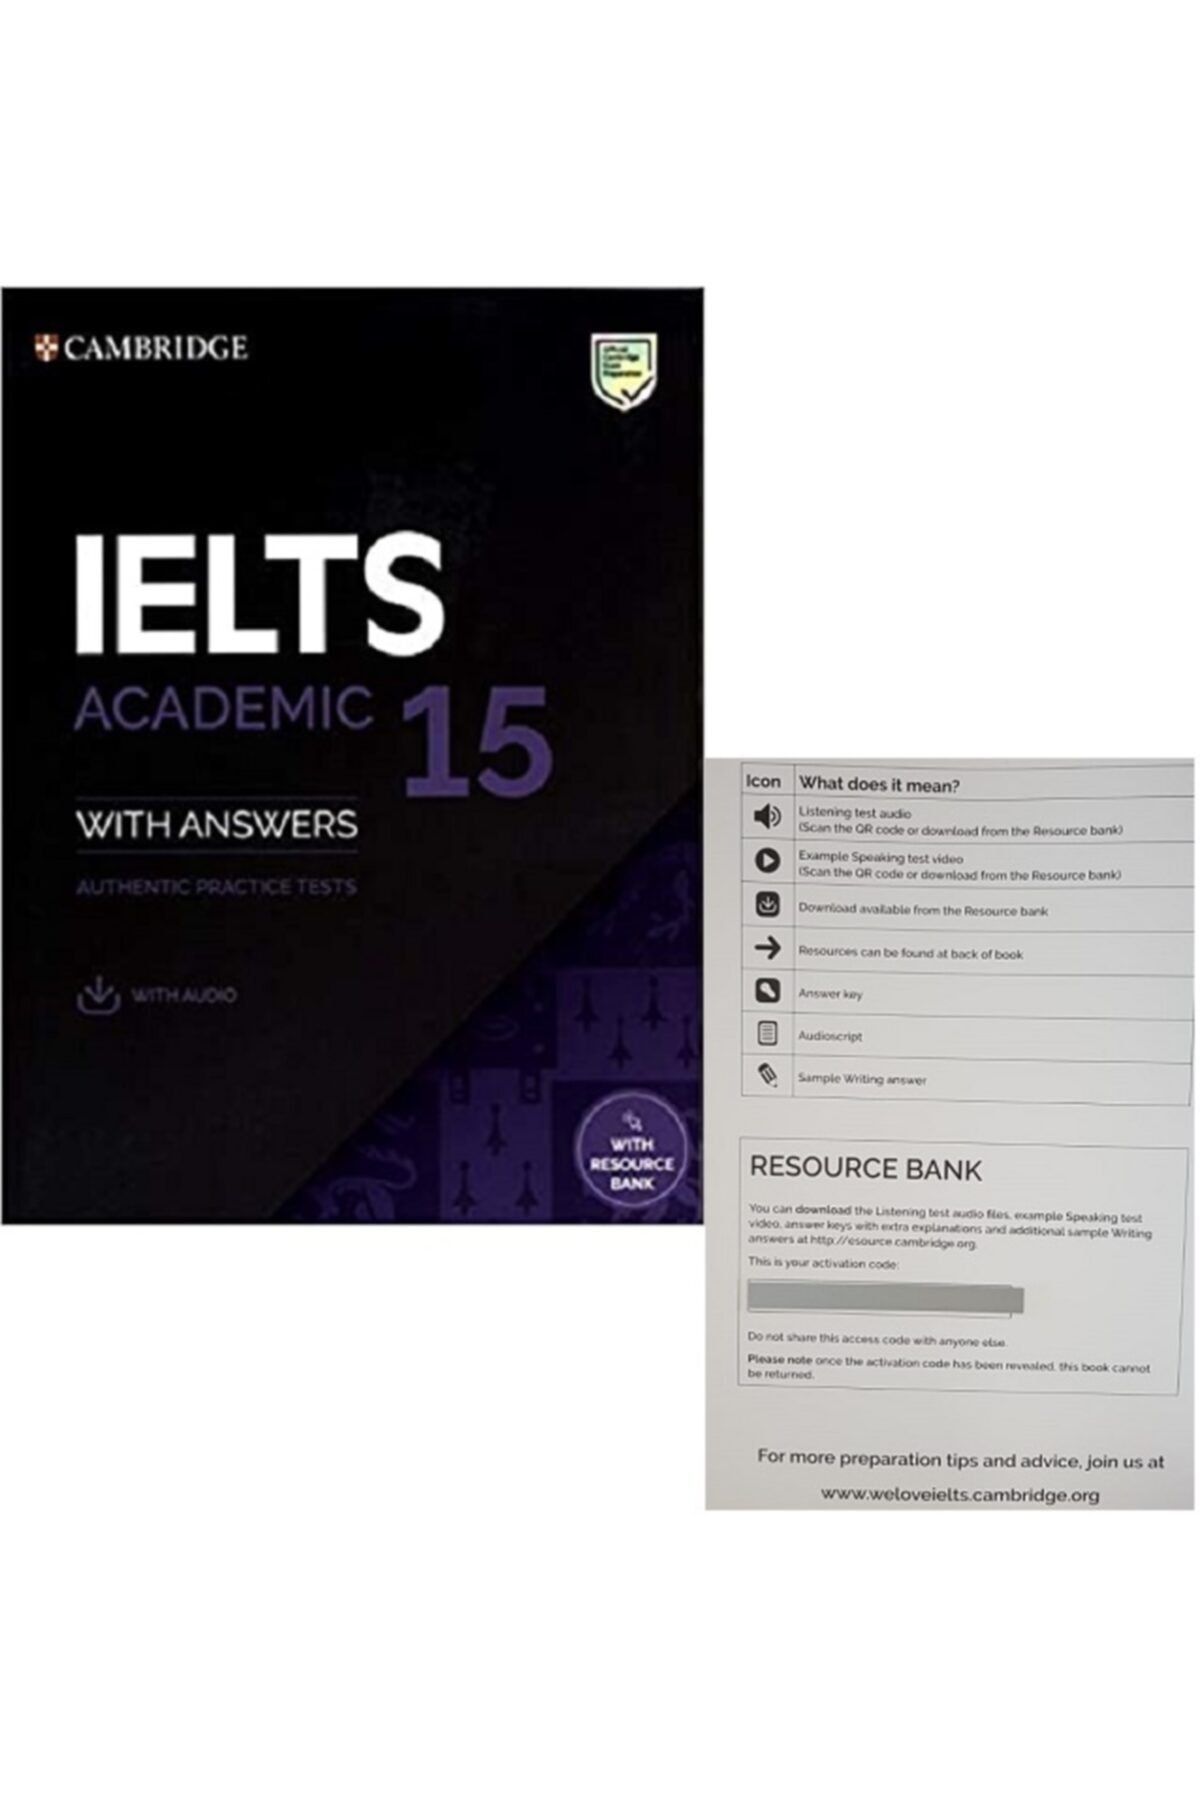 Cambridge University Ielts 15 Academic Student's Book With Answers + Audio & Resource Bank